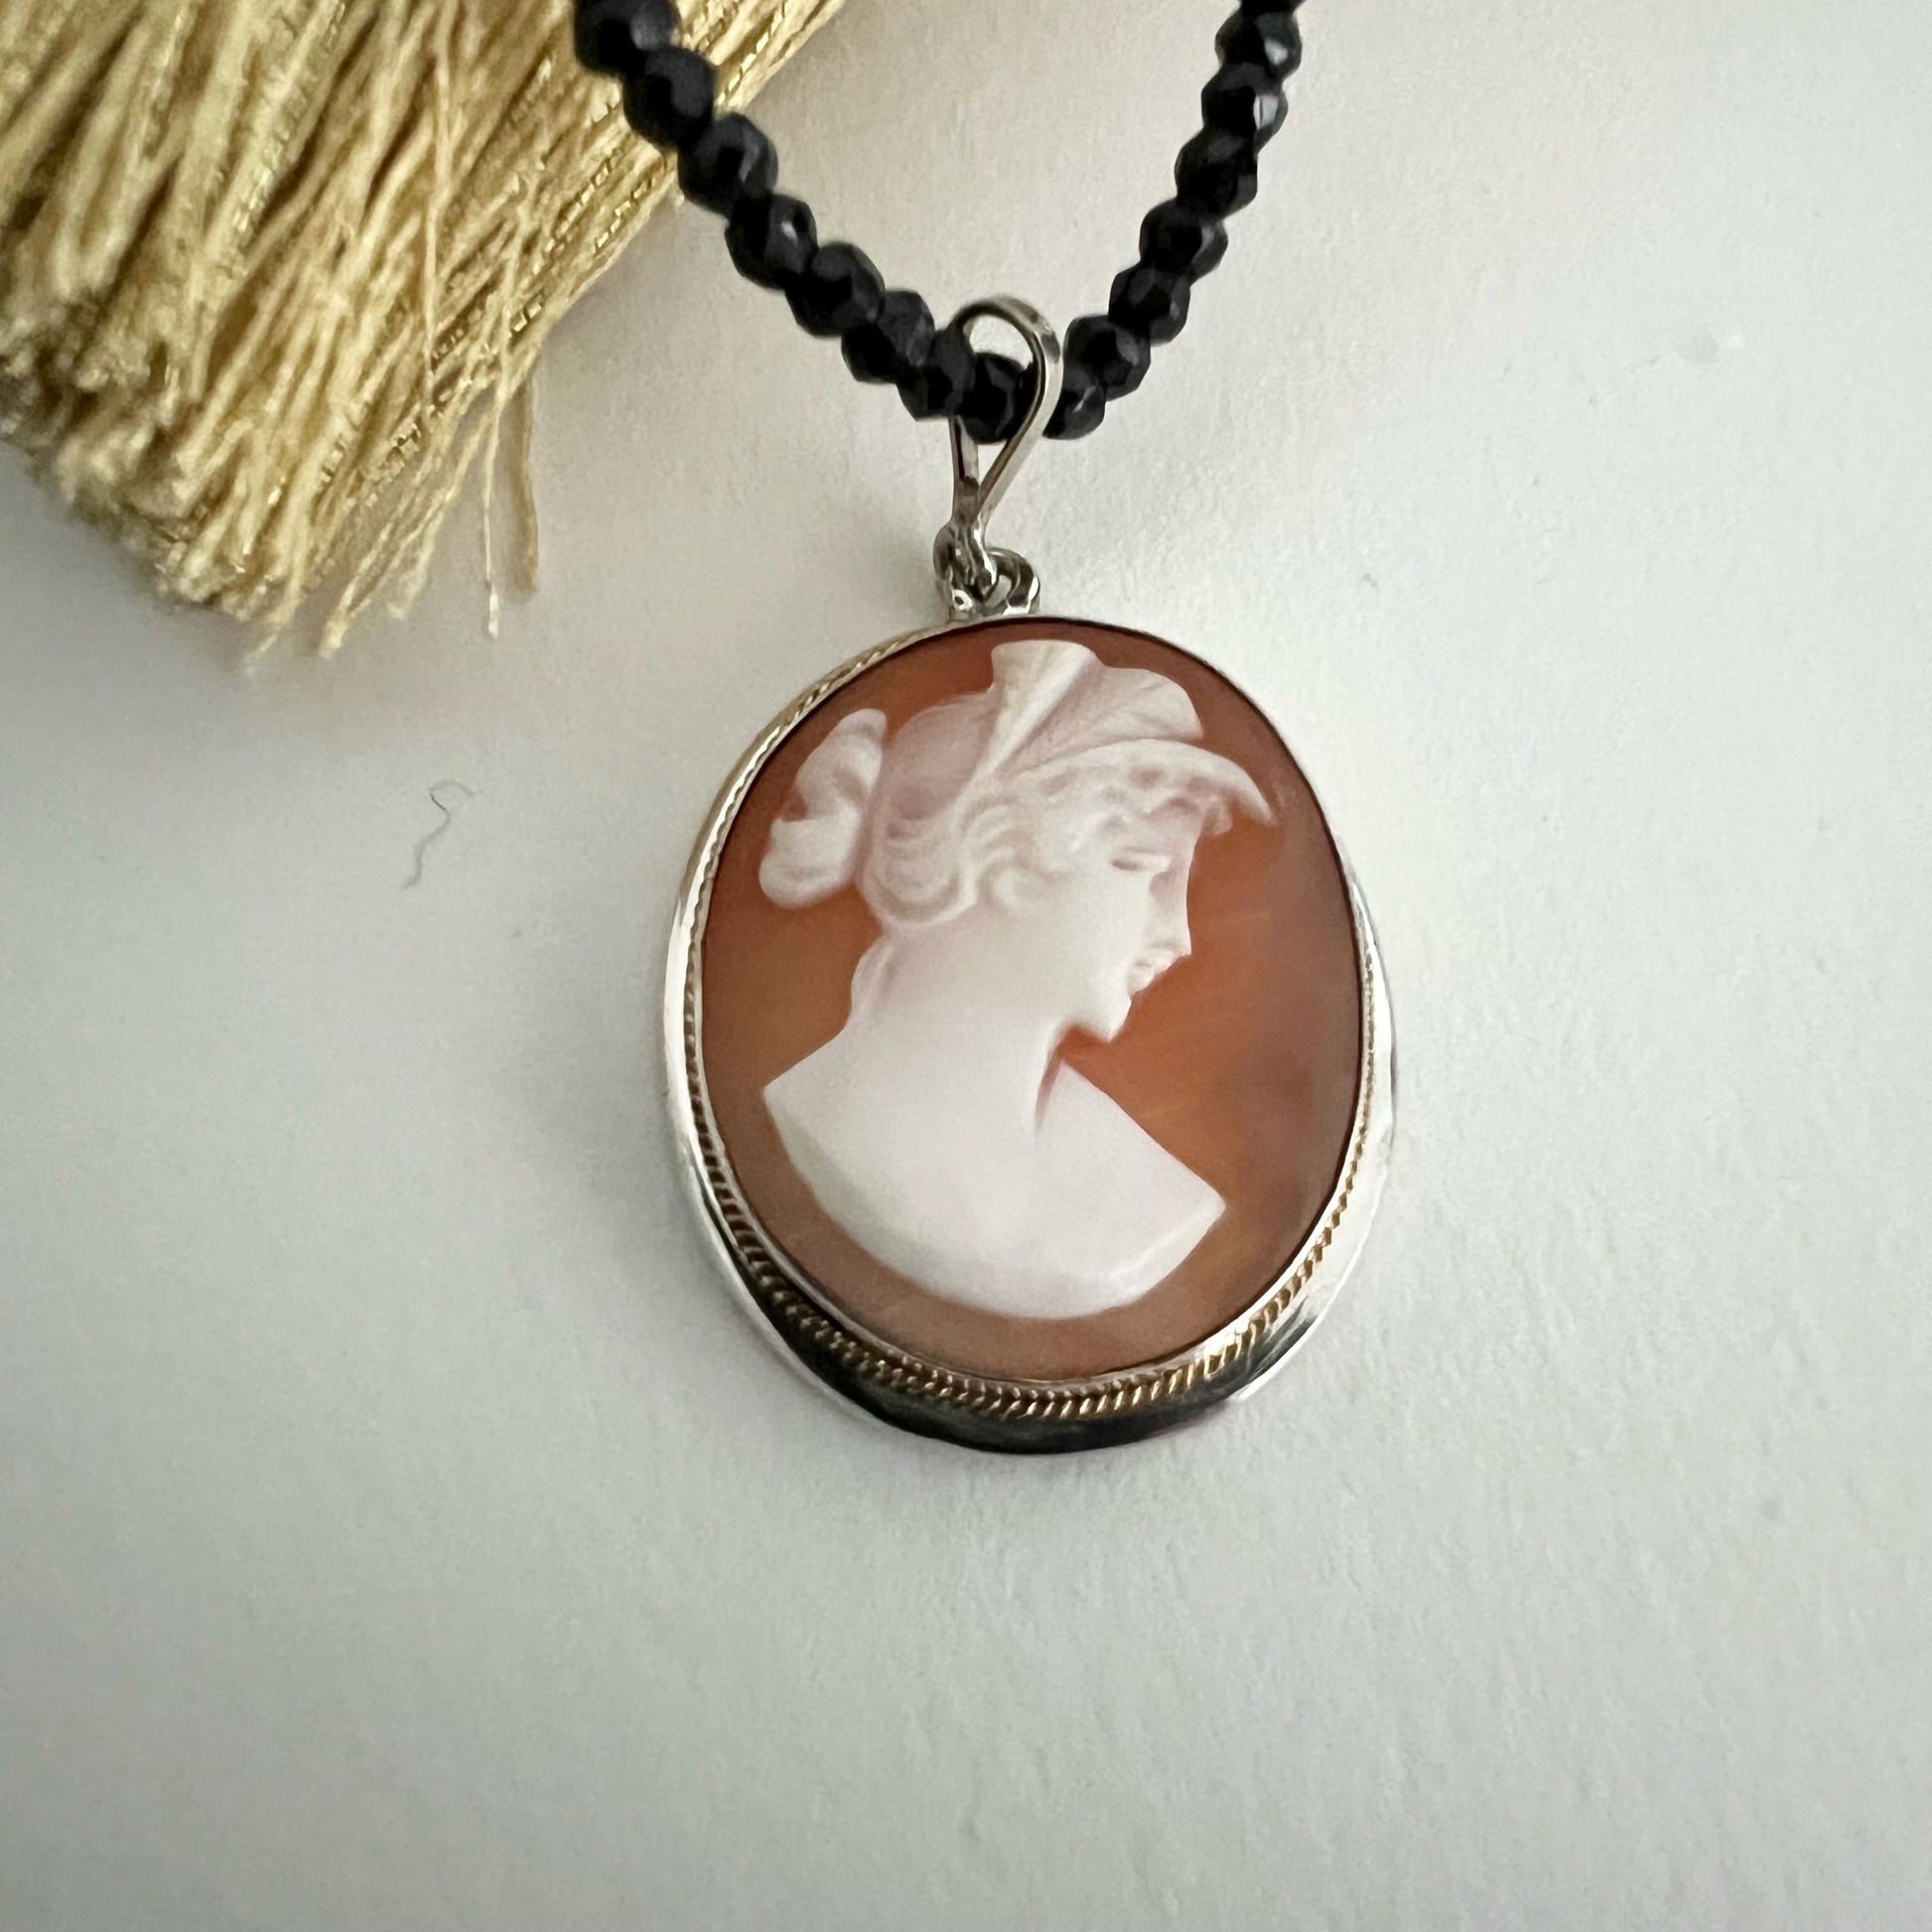 Vintage 1930 shell cameo sterling silver pendant depicting the profil of a woman in a Roman style.